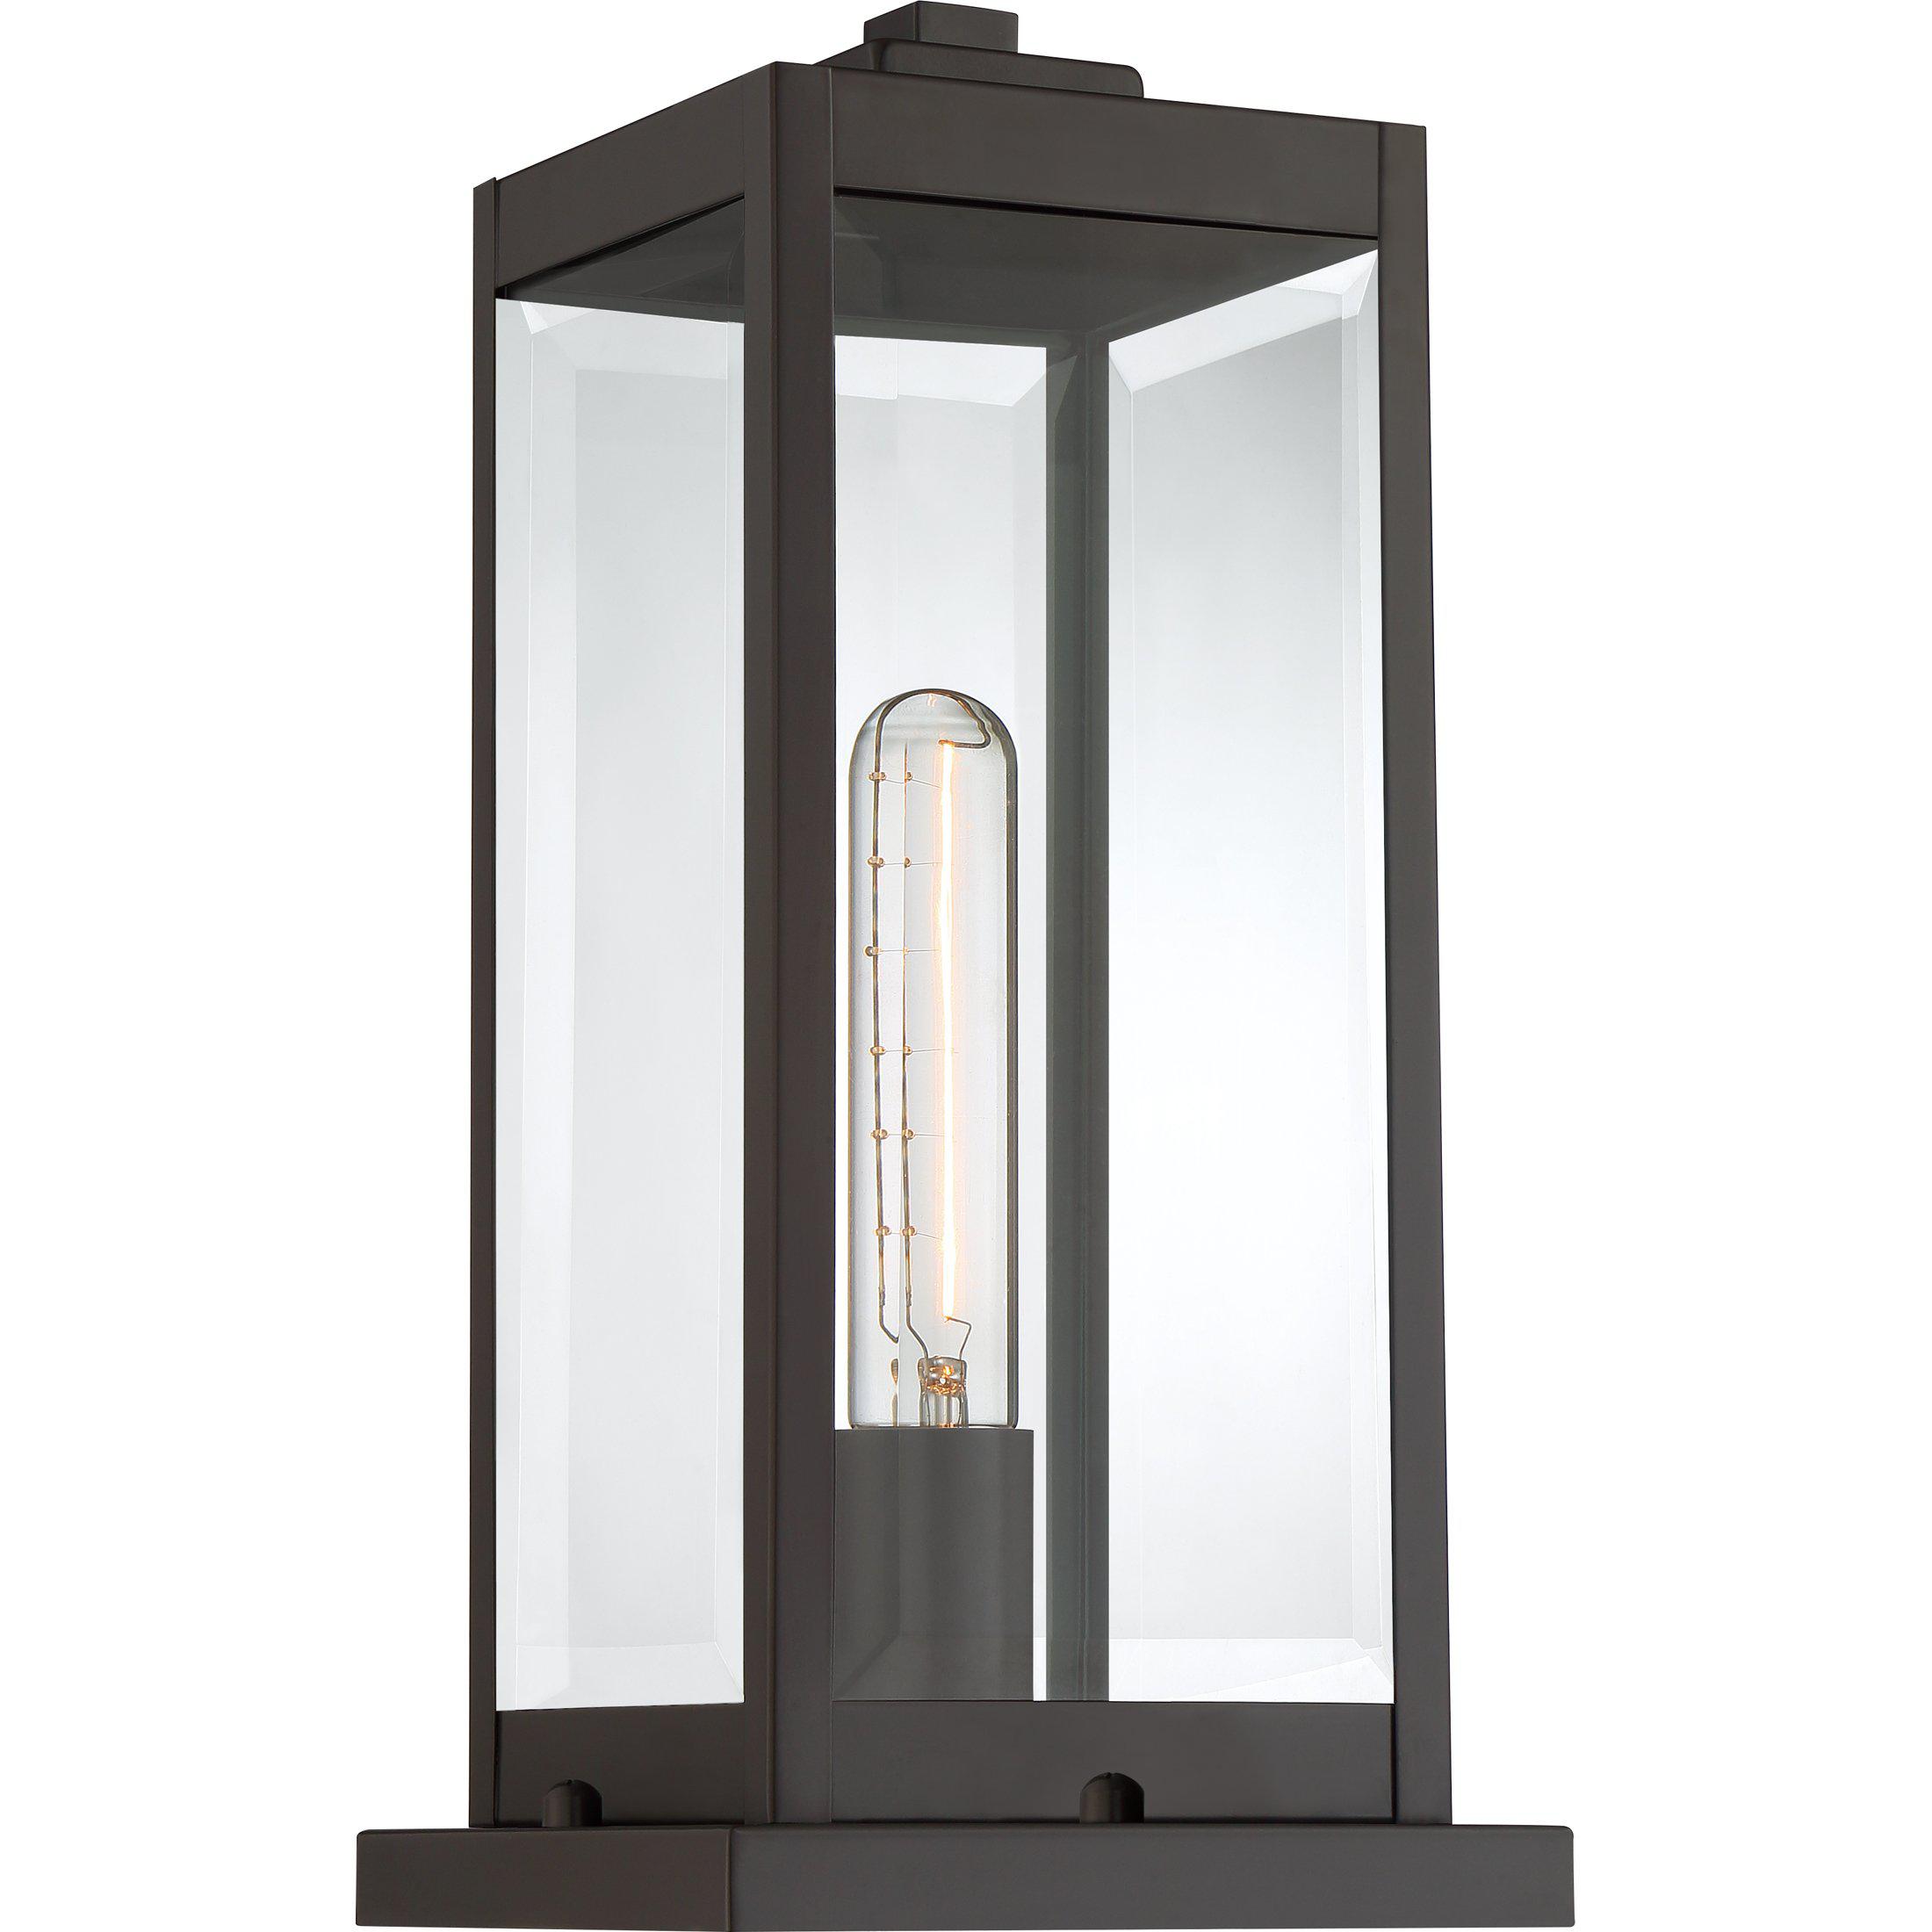 Quoizel  Westover Outdoor Lantern, Pier Outdoor l Wall Quoizel   